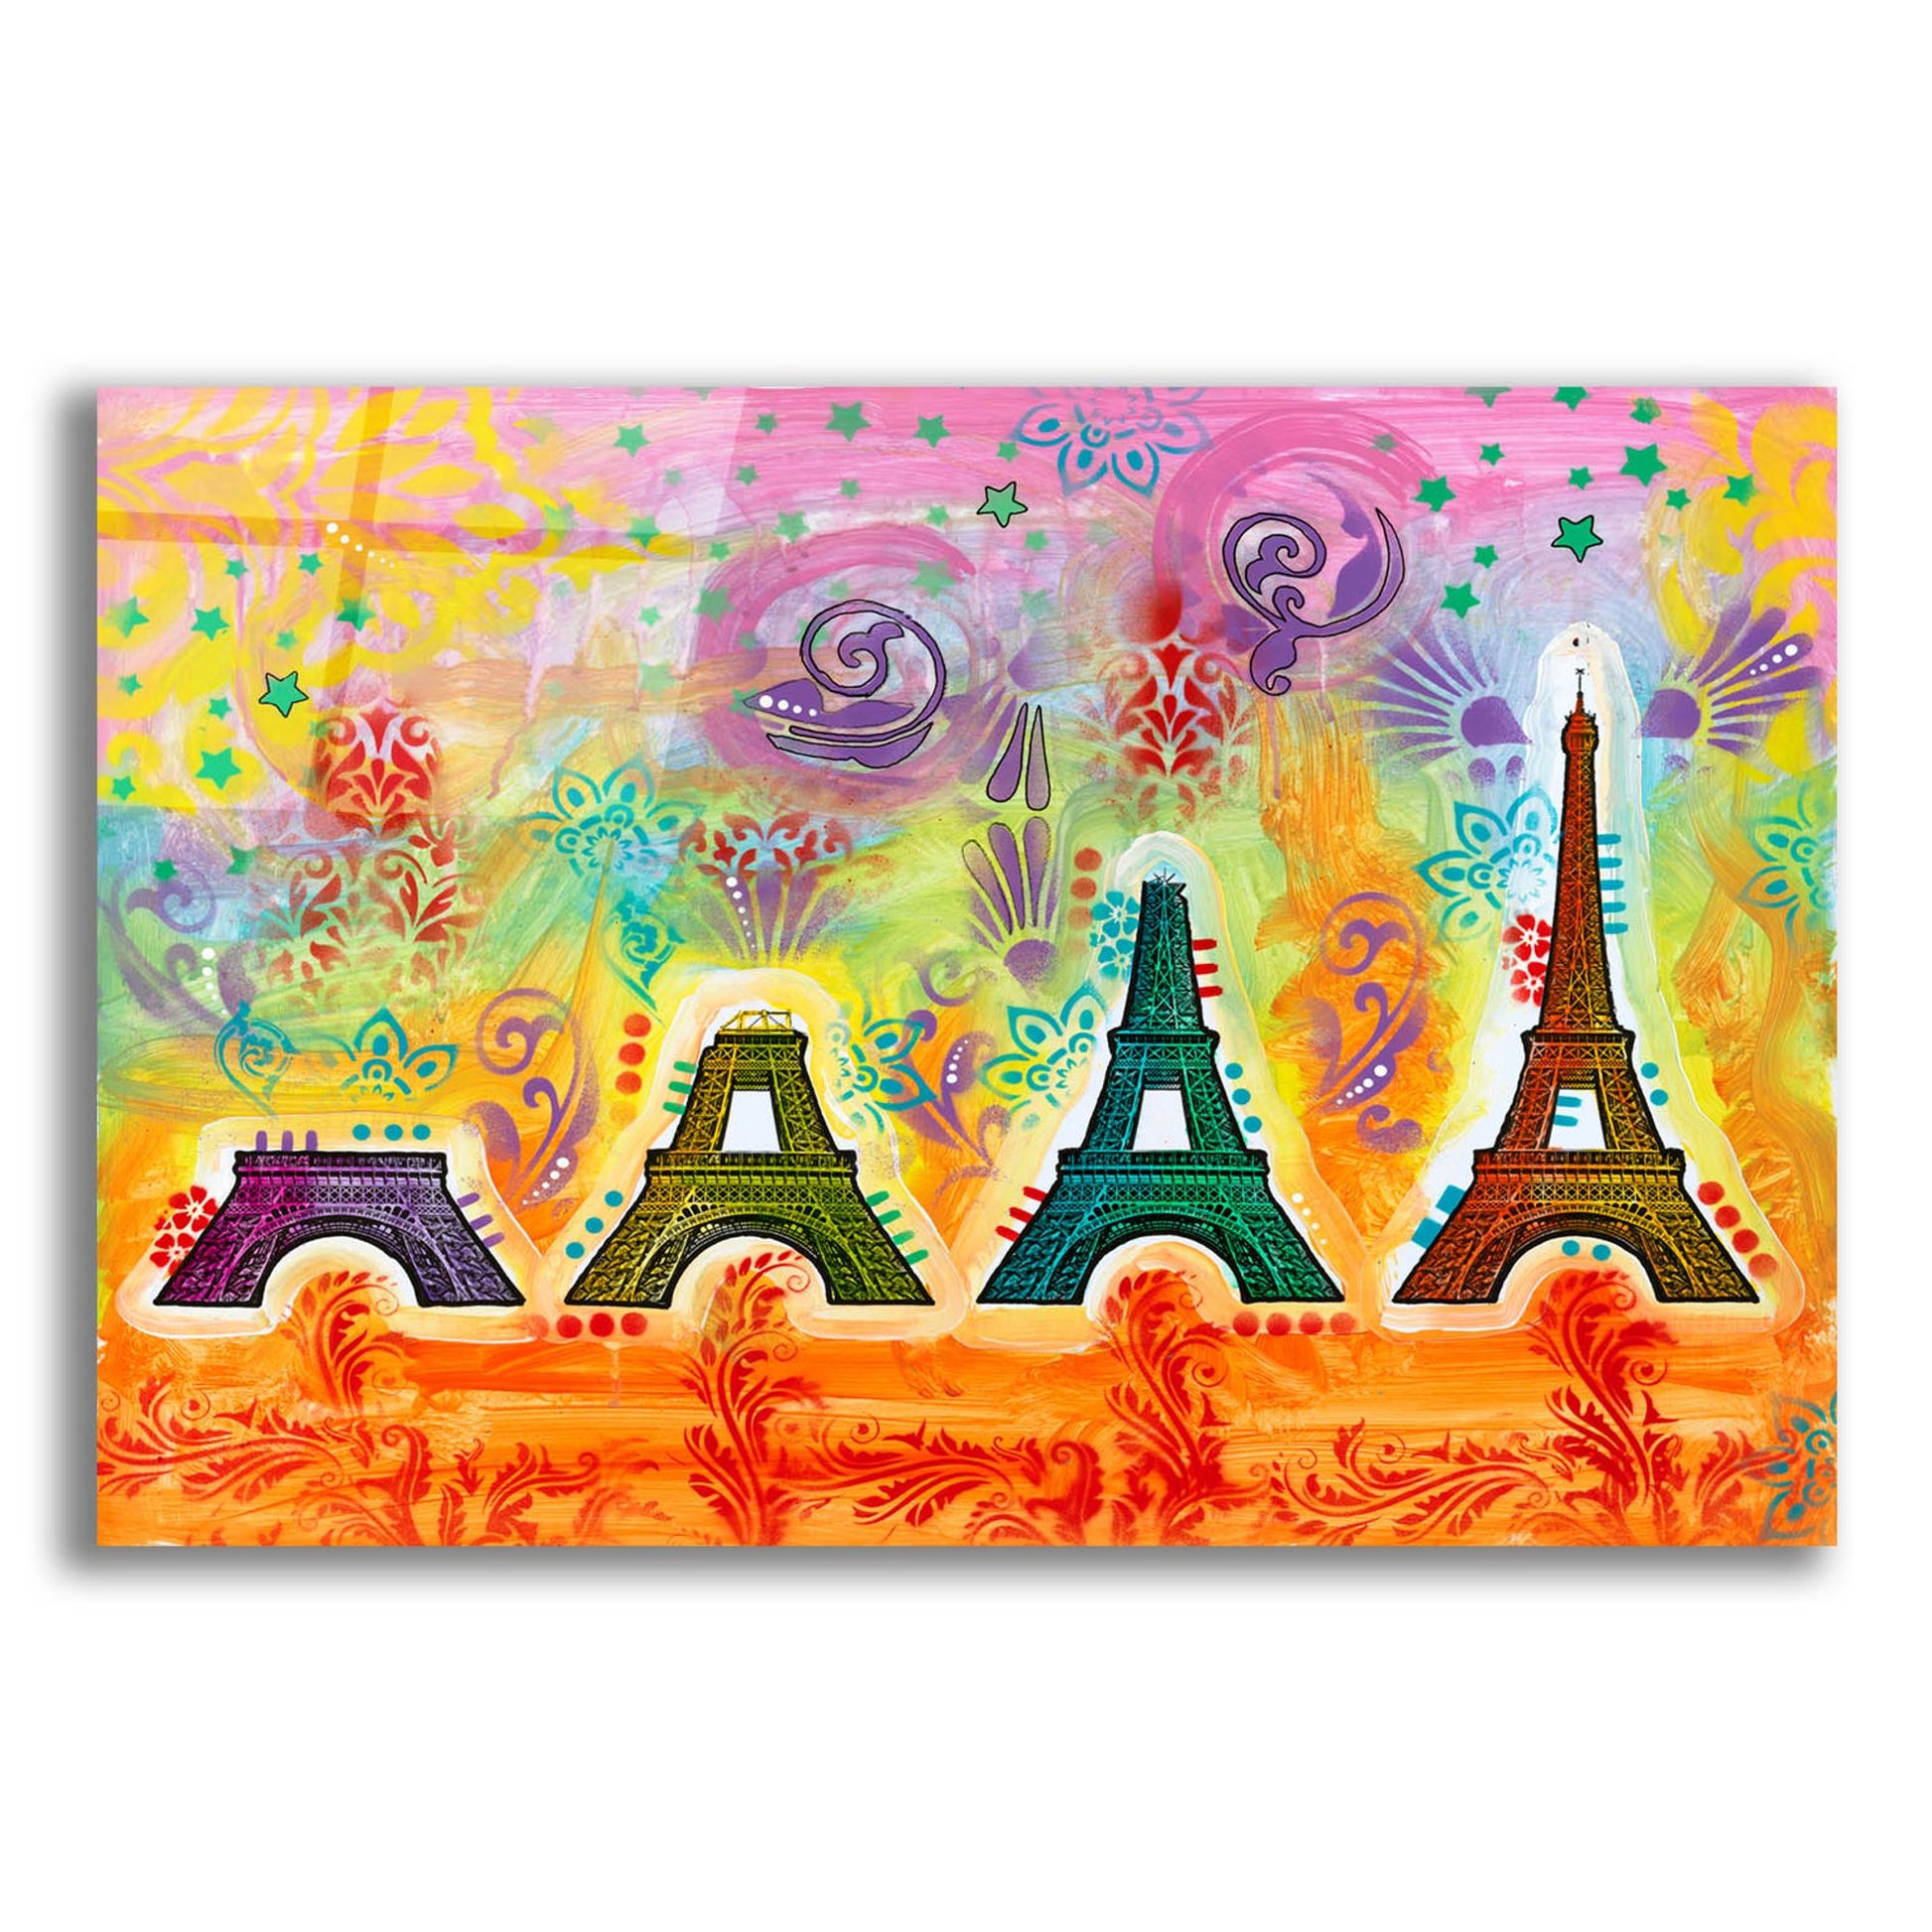 Epic Art 'Construction of the Eiffel Tower' by Dean Russo, Acrylic Glass Wall Art